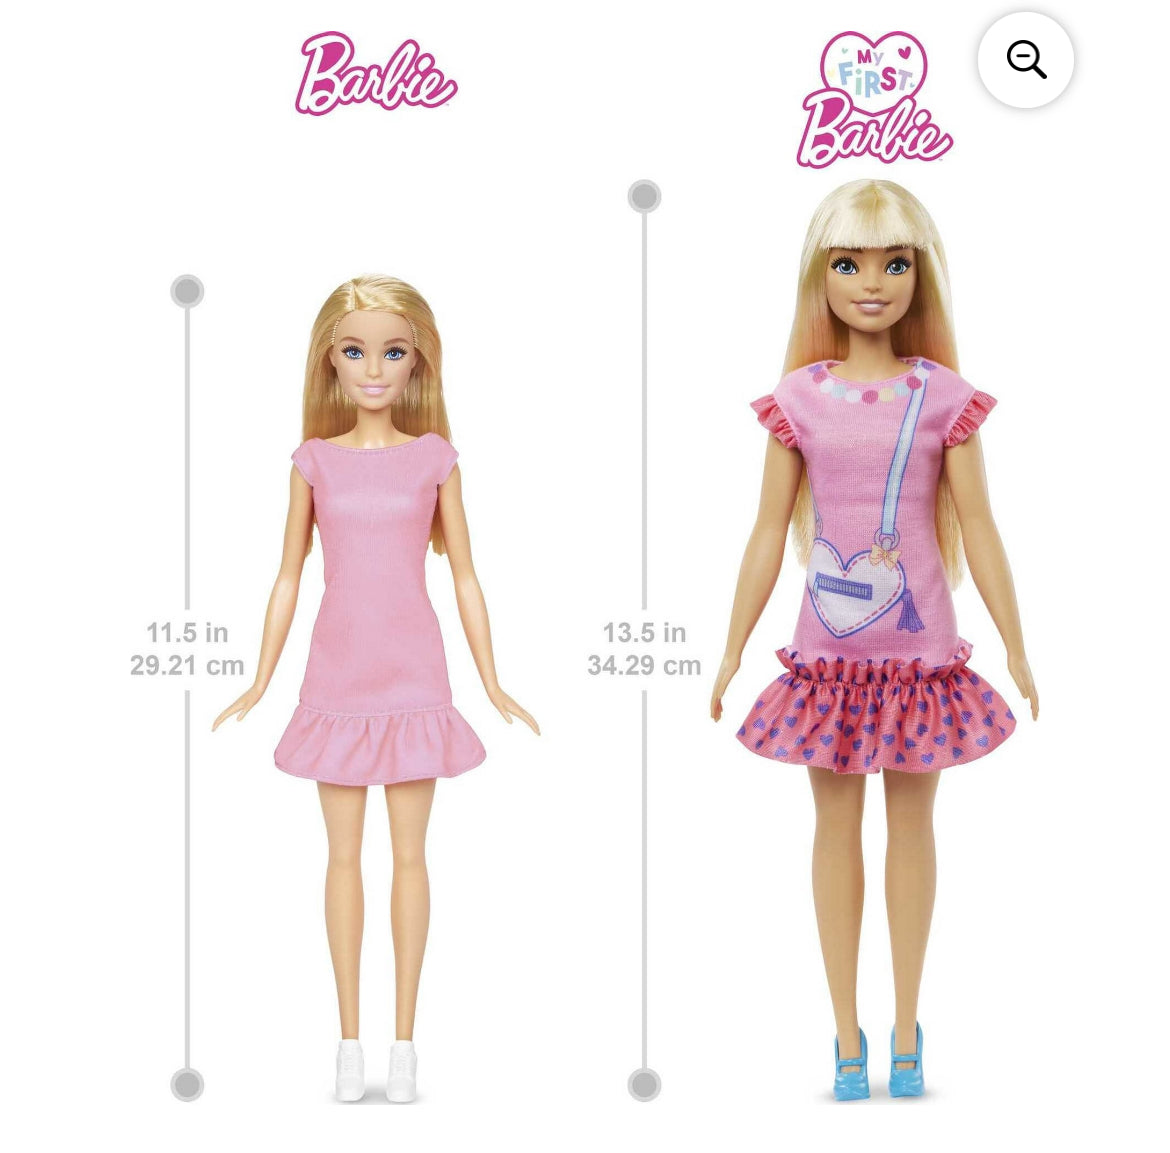 My First Barbie Doll for Preschoolers, 'Malibu' Blonde Posable Doll with Kitten and Accessories 11454